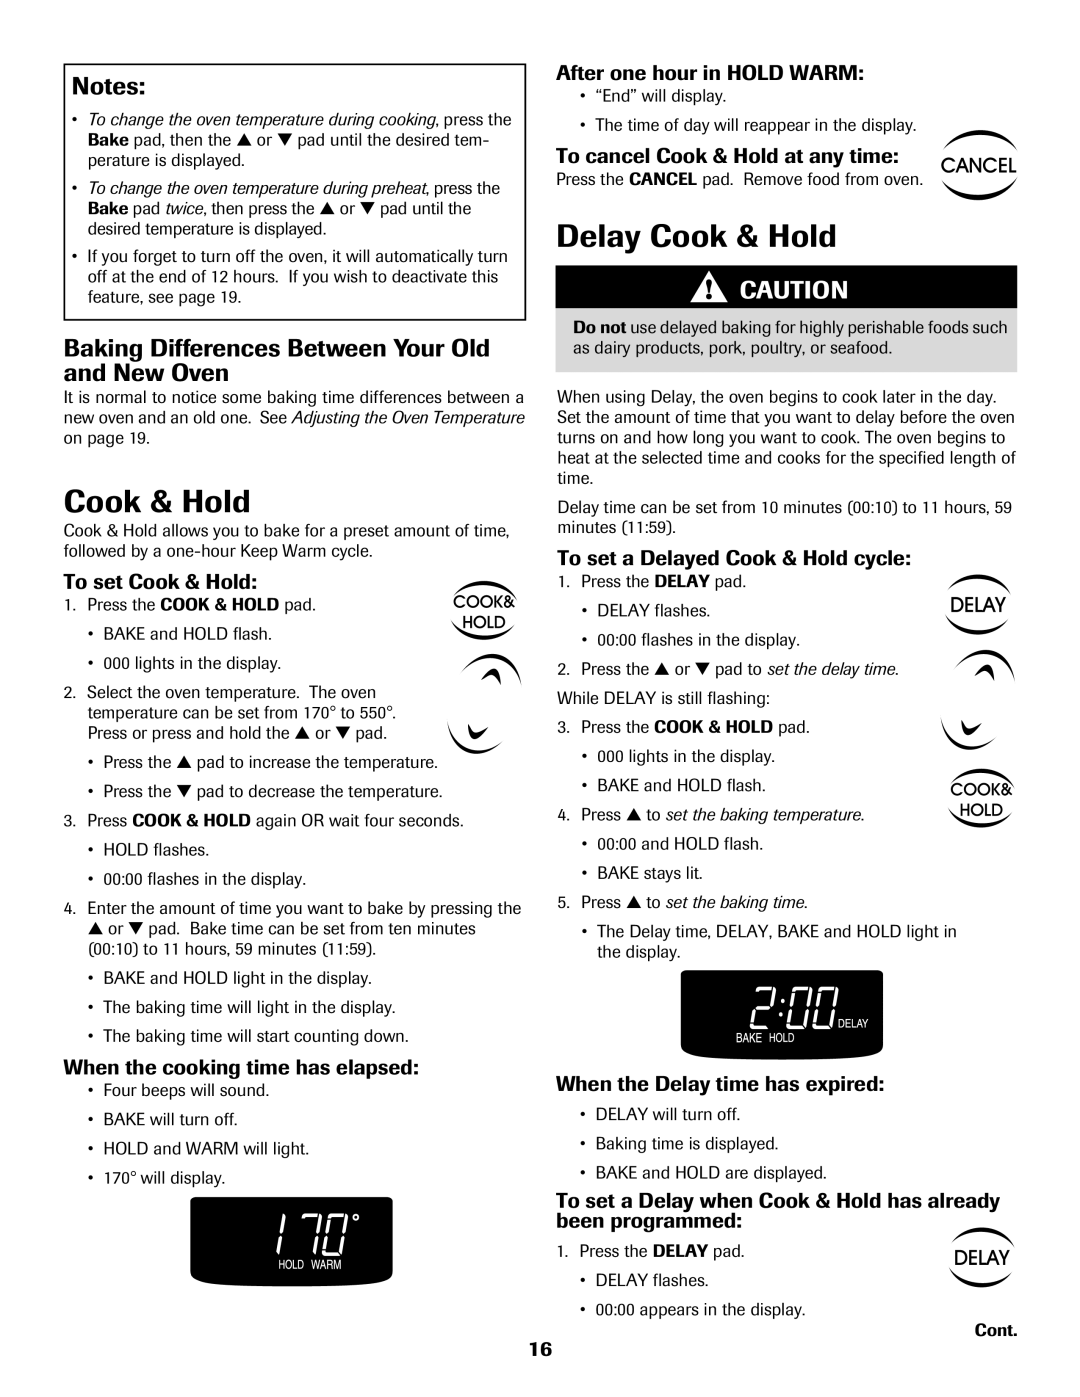 Maytag 500 Delay Cook & Hold, Baking Differences Between Your Old and New Oven, To set Cook & Hold, Notes 